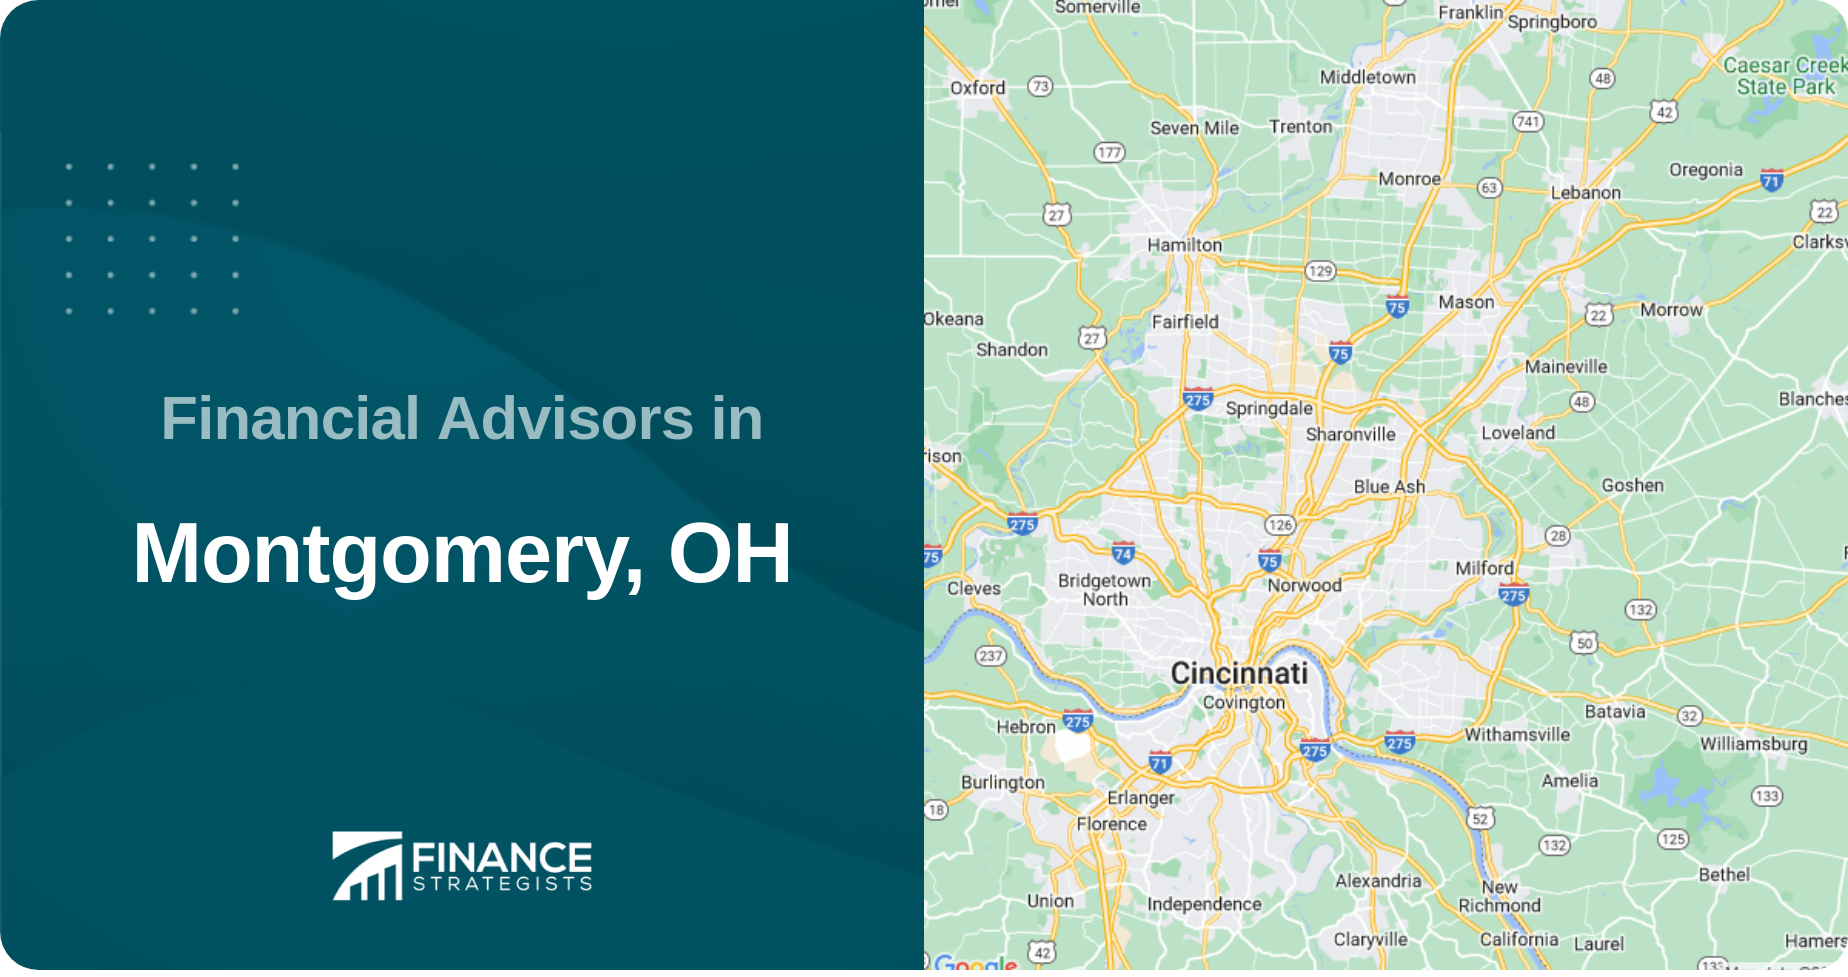 Financial Advisors in Montgomery, OH